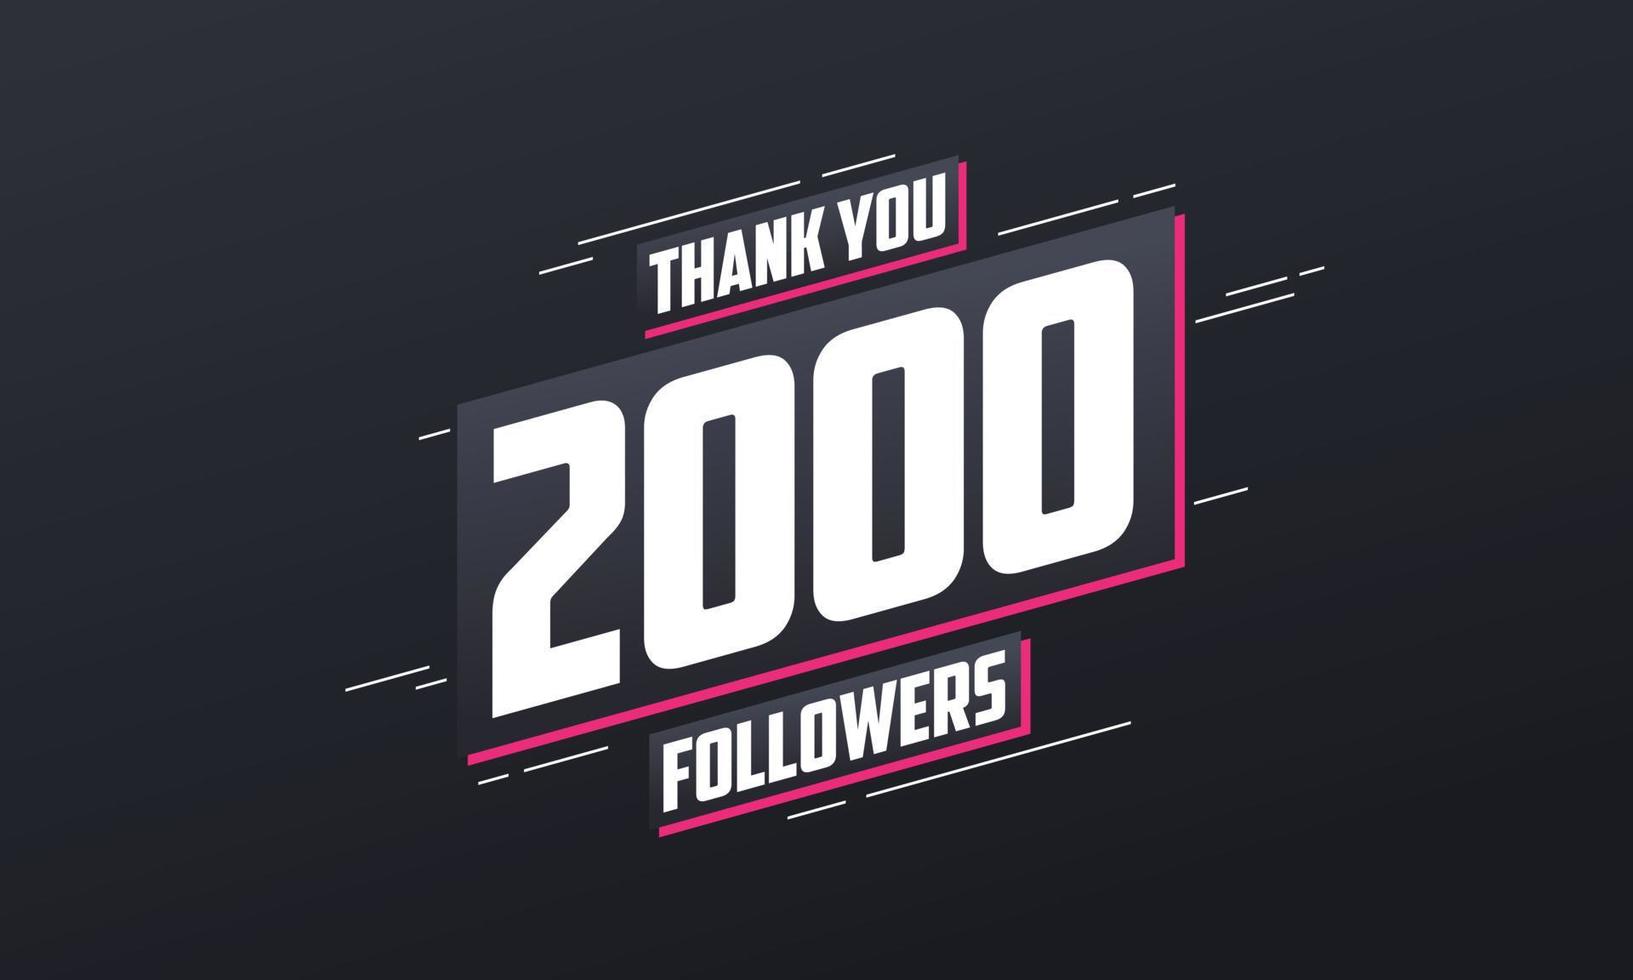 Thank you 2000 followers, Greeting card template for social networks. vector